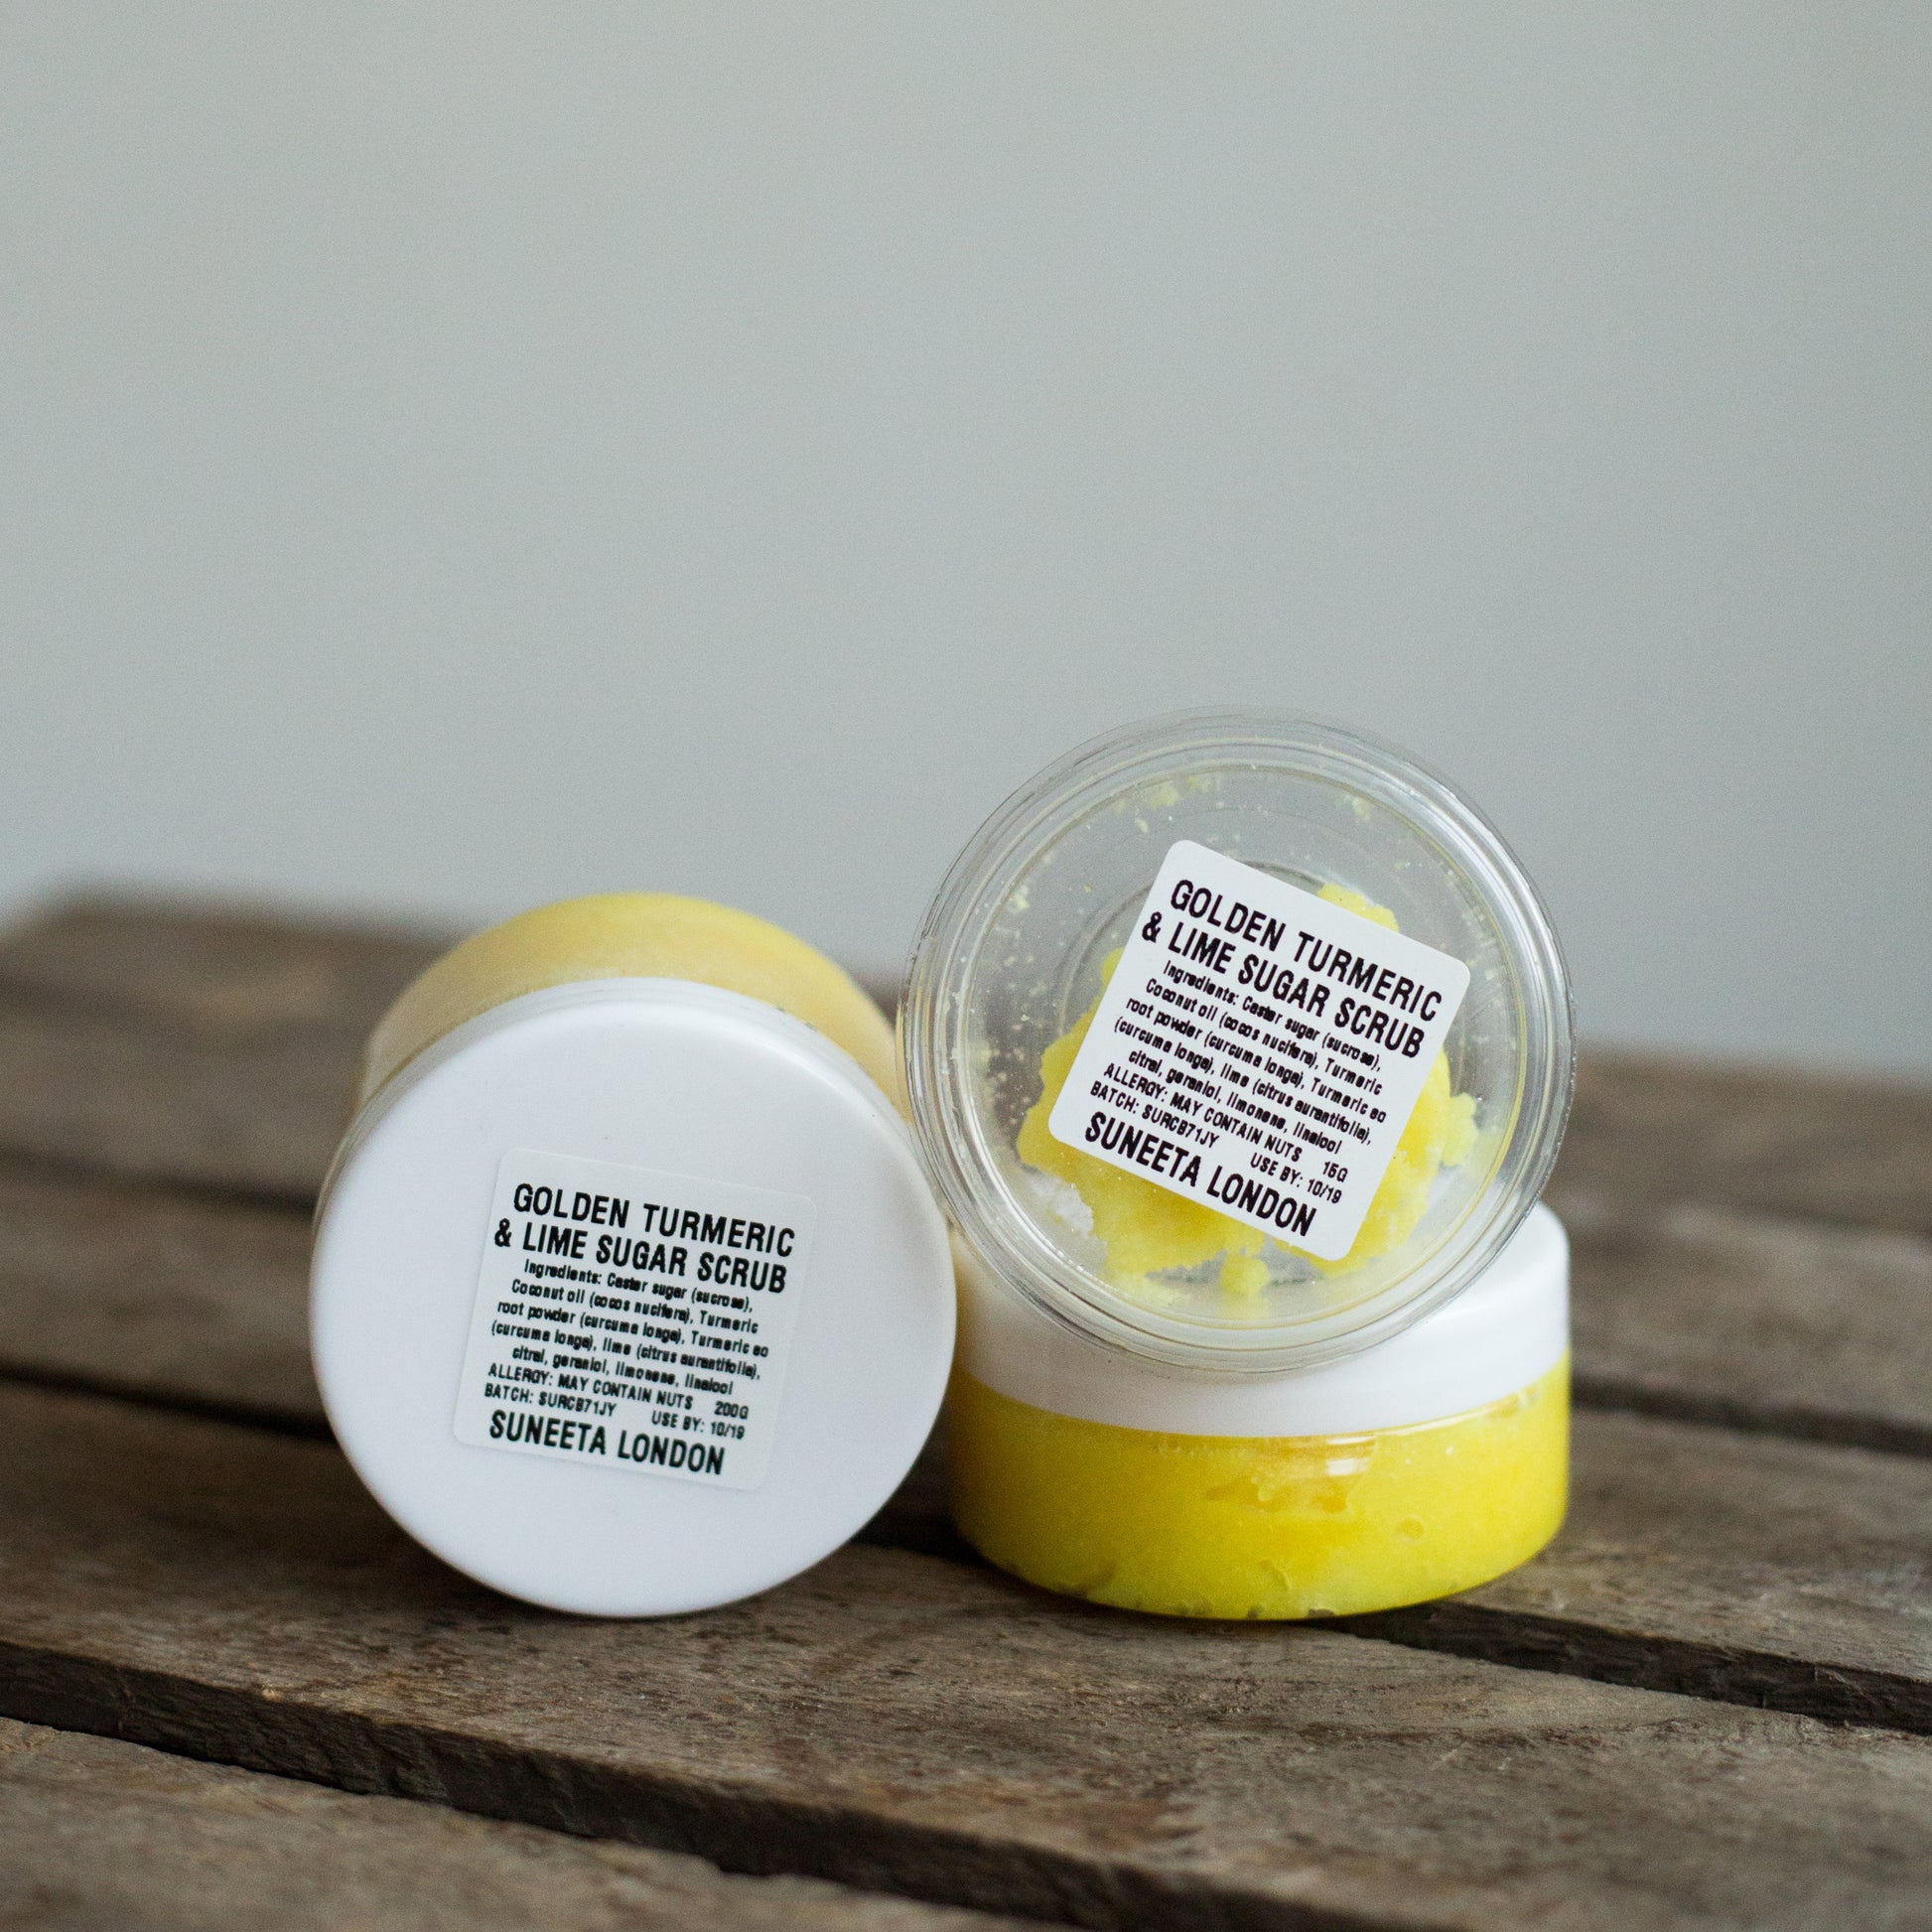 Golden Turmeric Lime Scrub in various sizes, by Suneeta London X Weigh and Pay